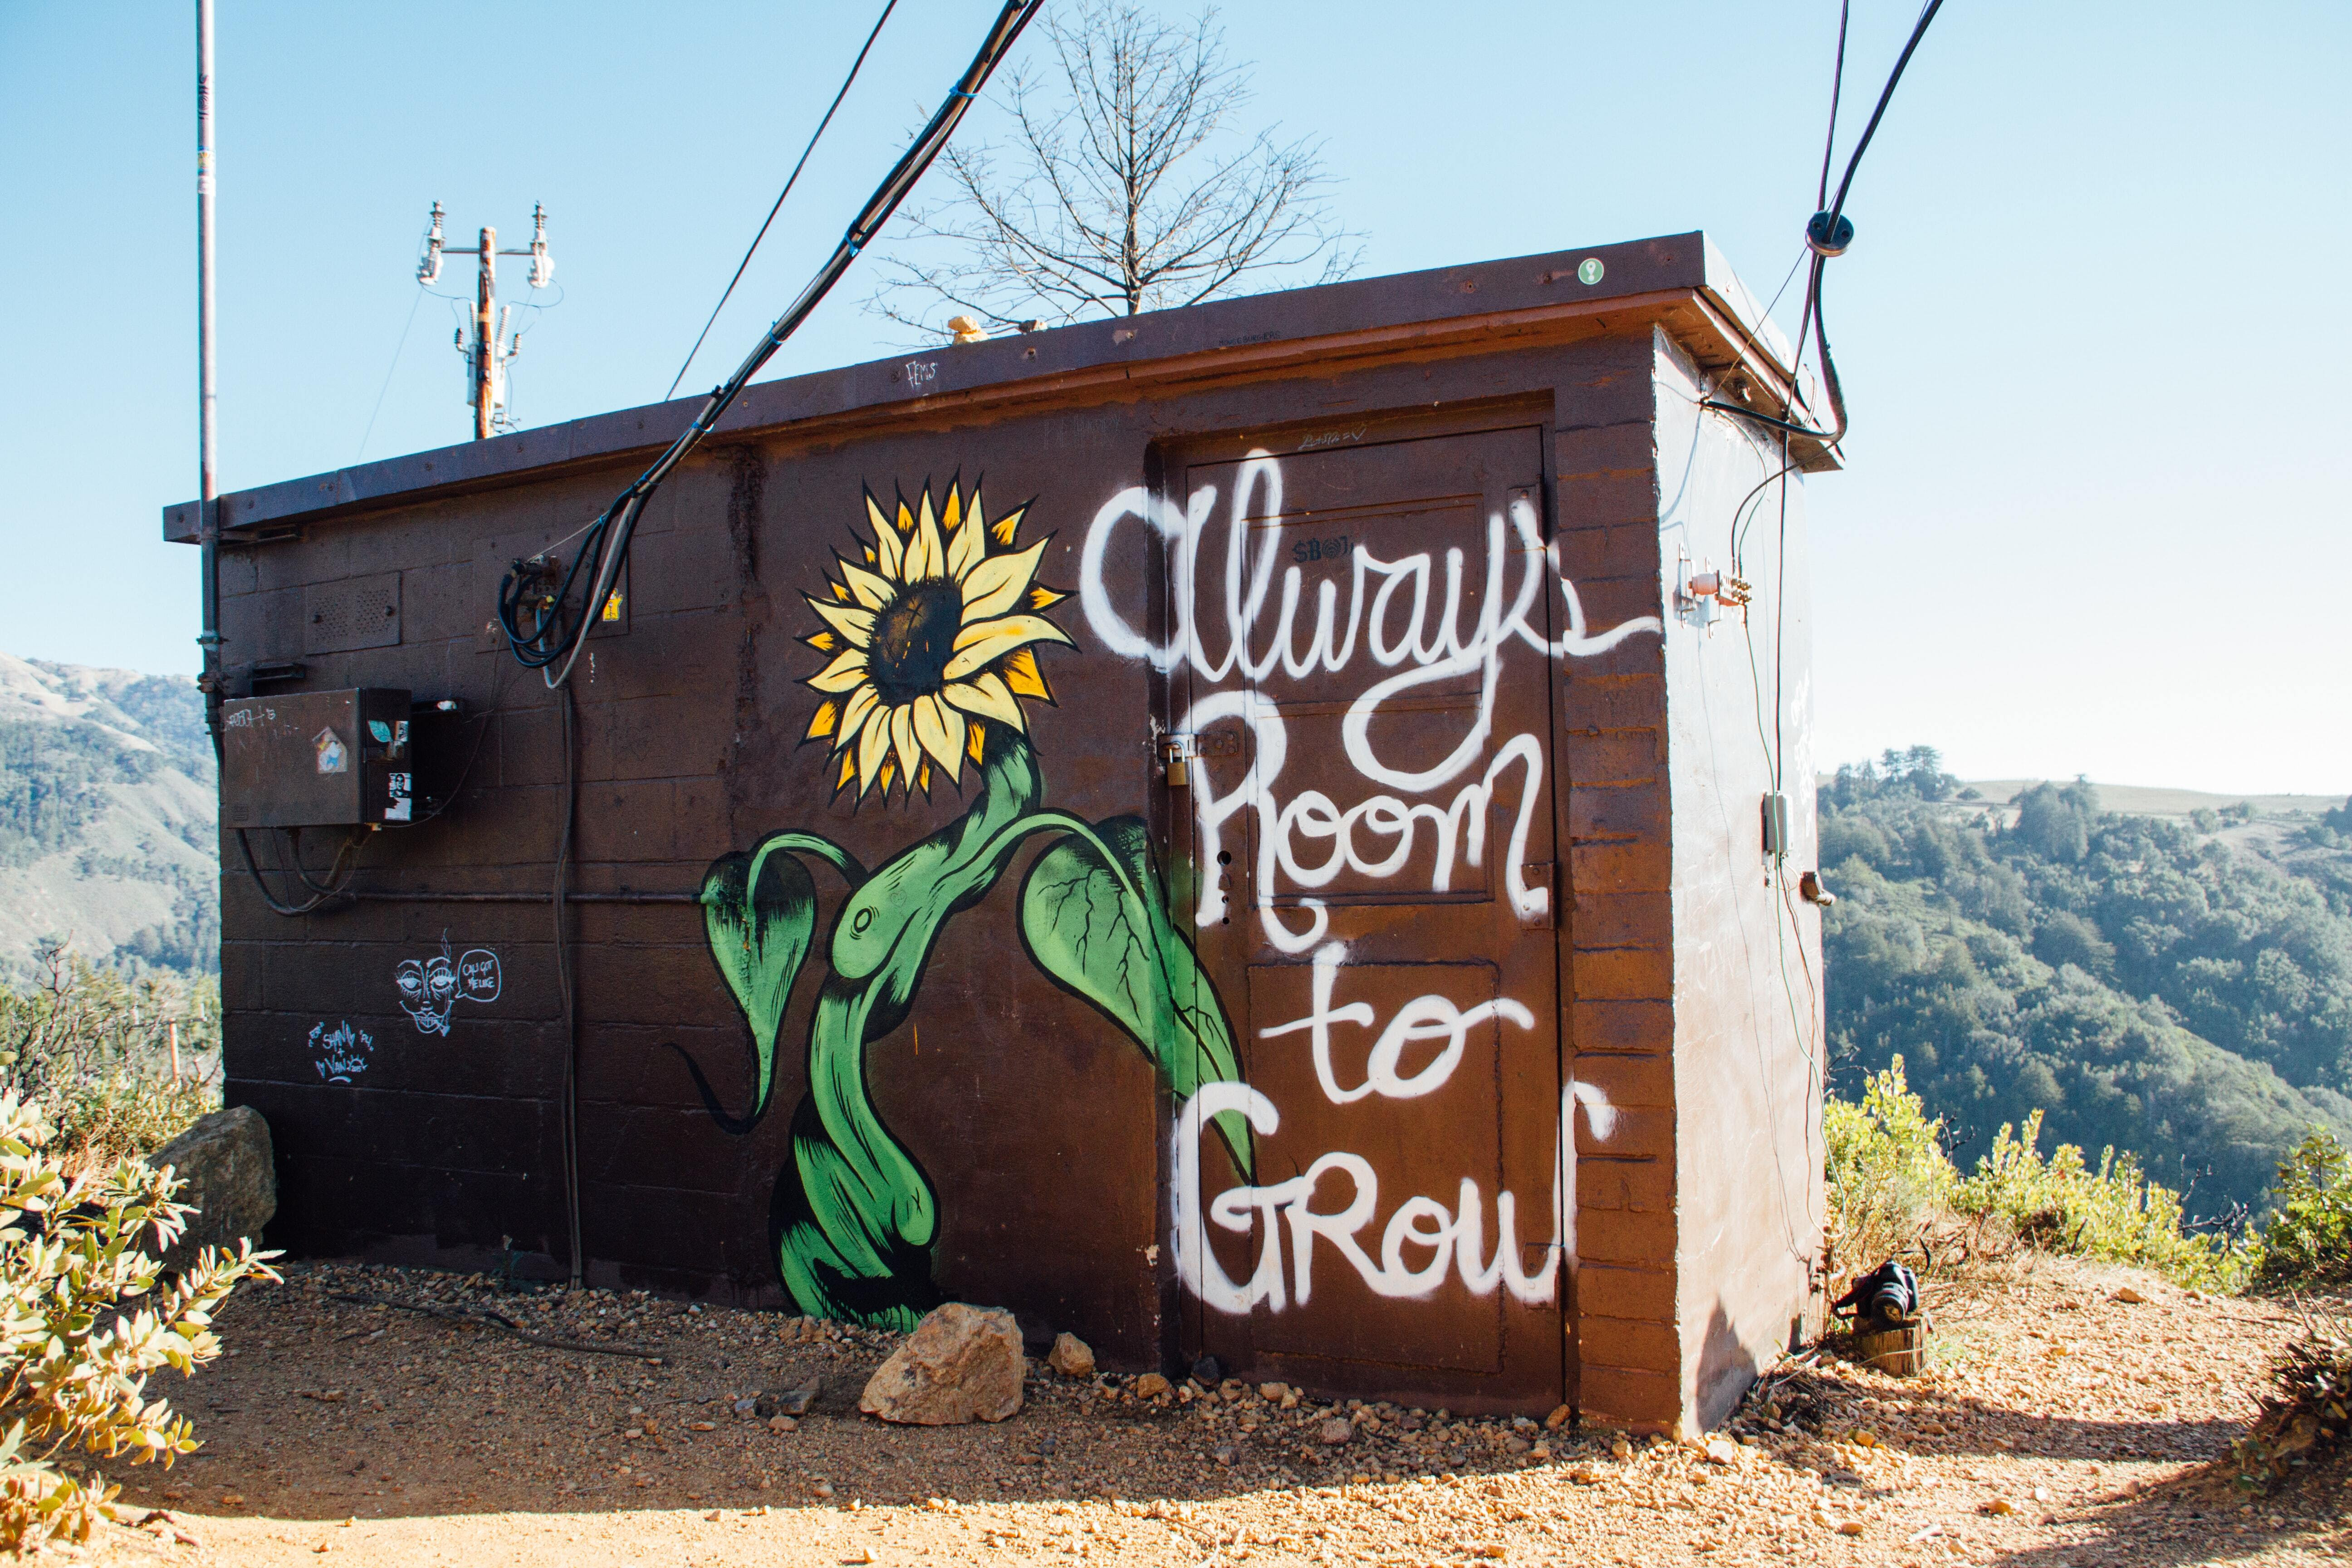 Photo of a small hut on a hilltop, with the words "always room to grow" spraypainted on, next to a painting of a sunflower